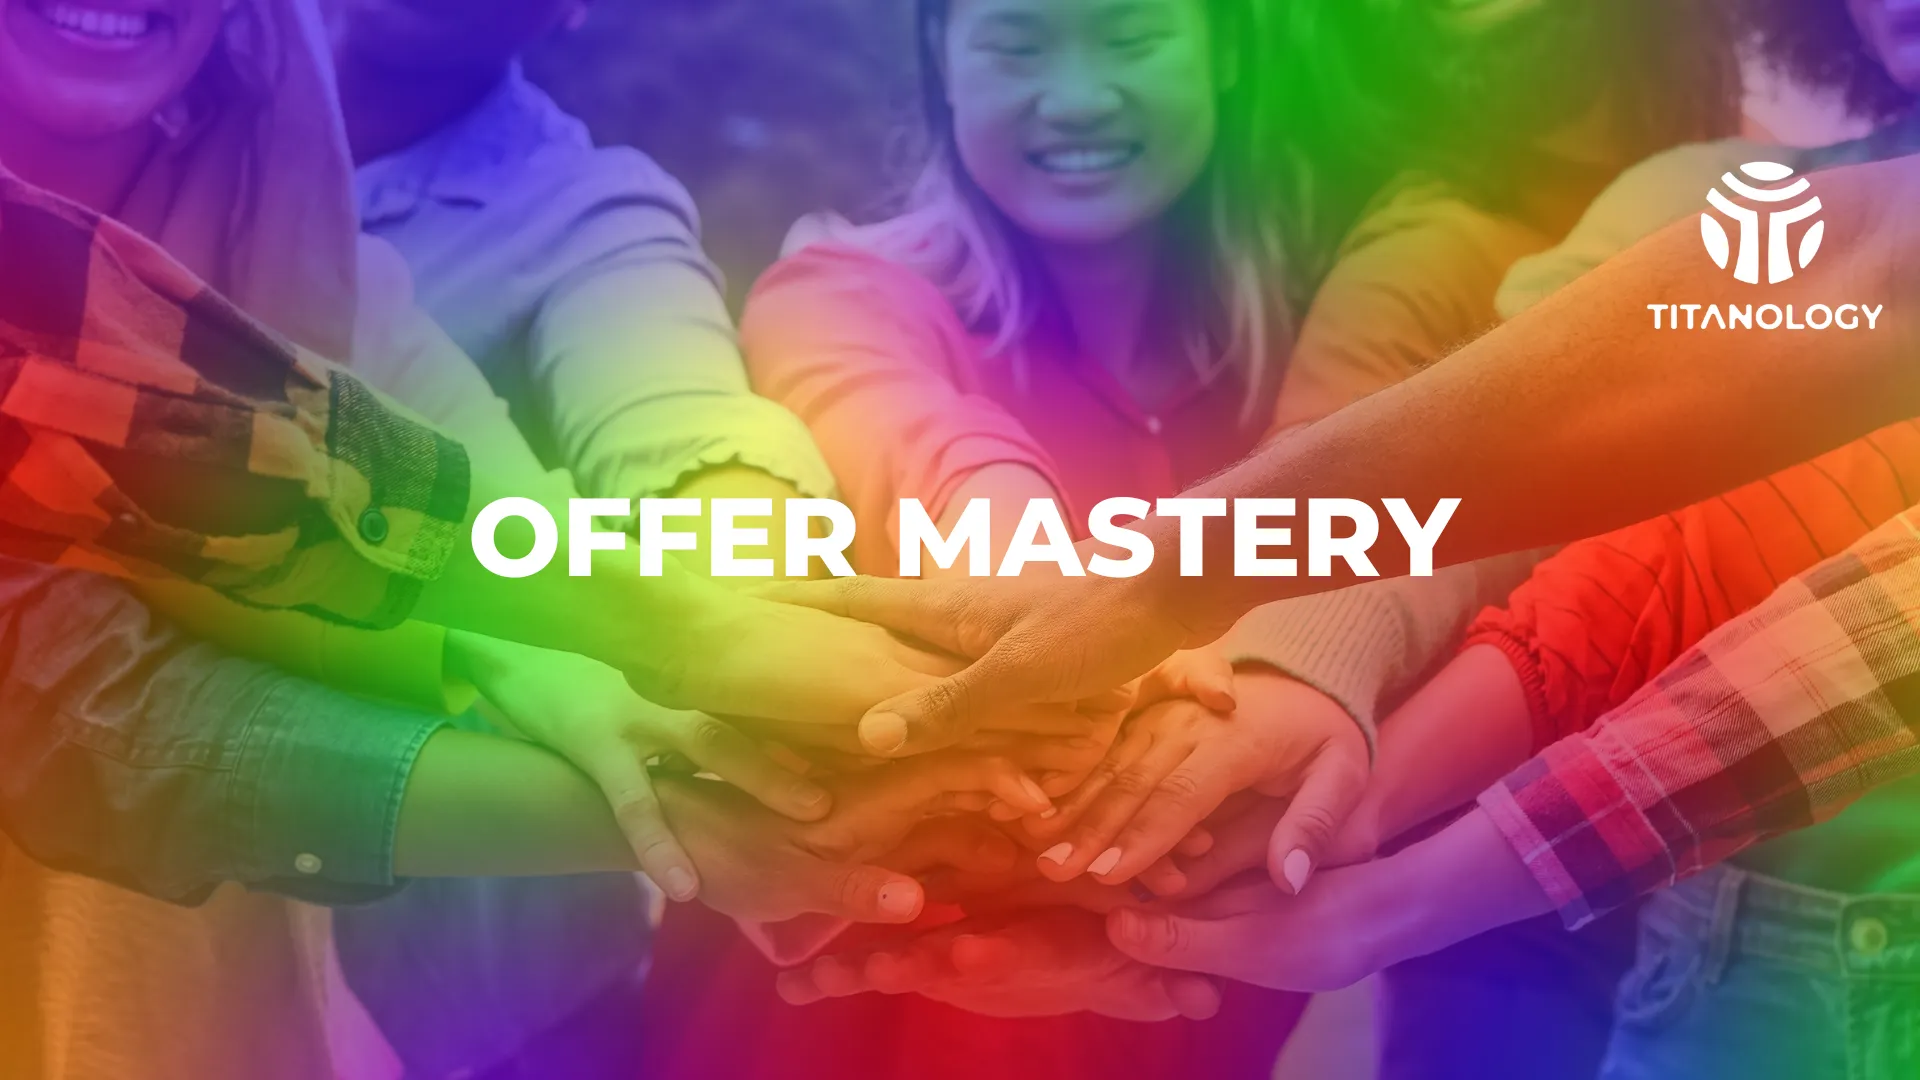 Offer Mastery